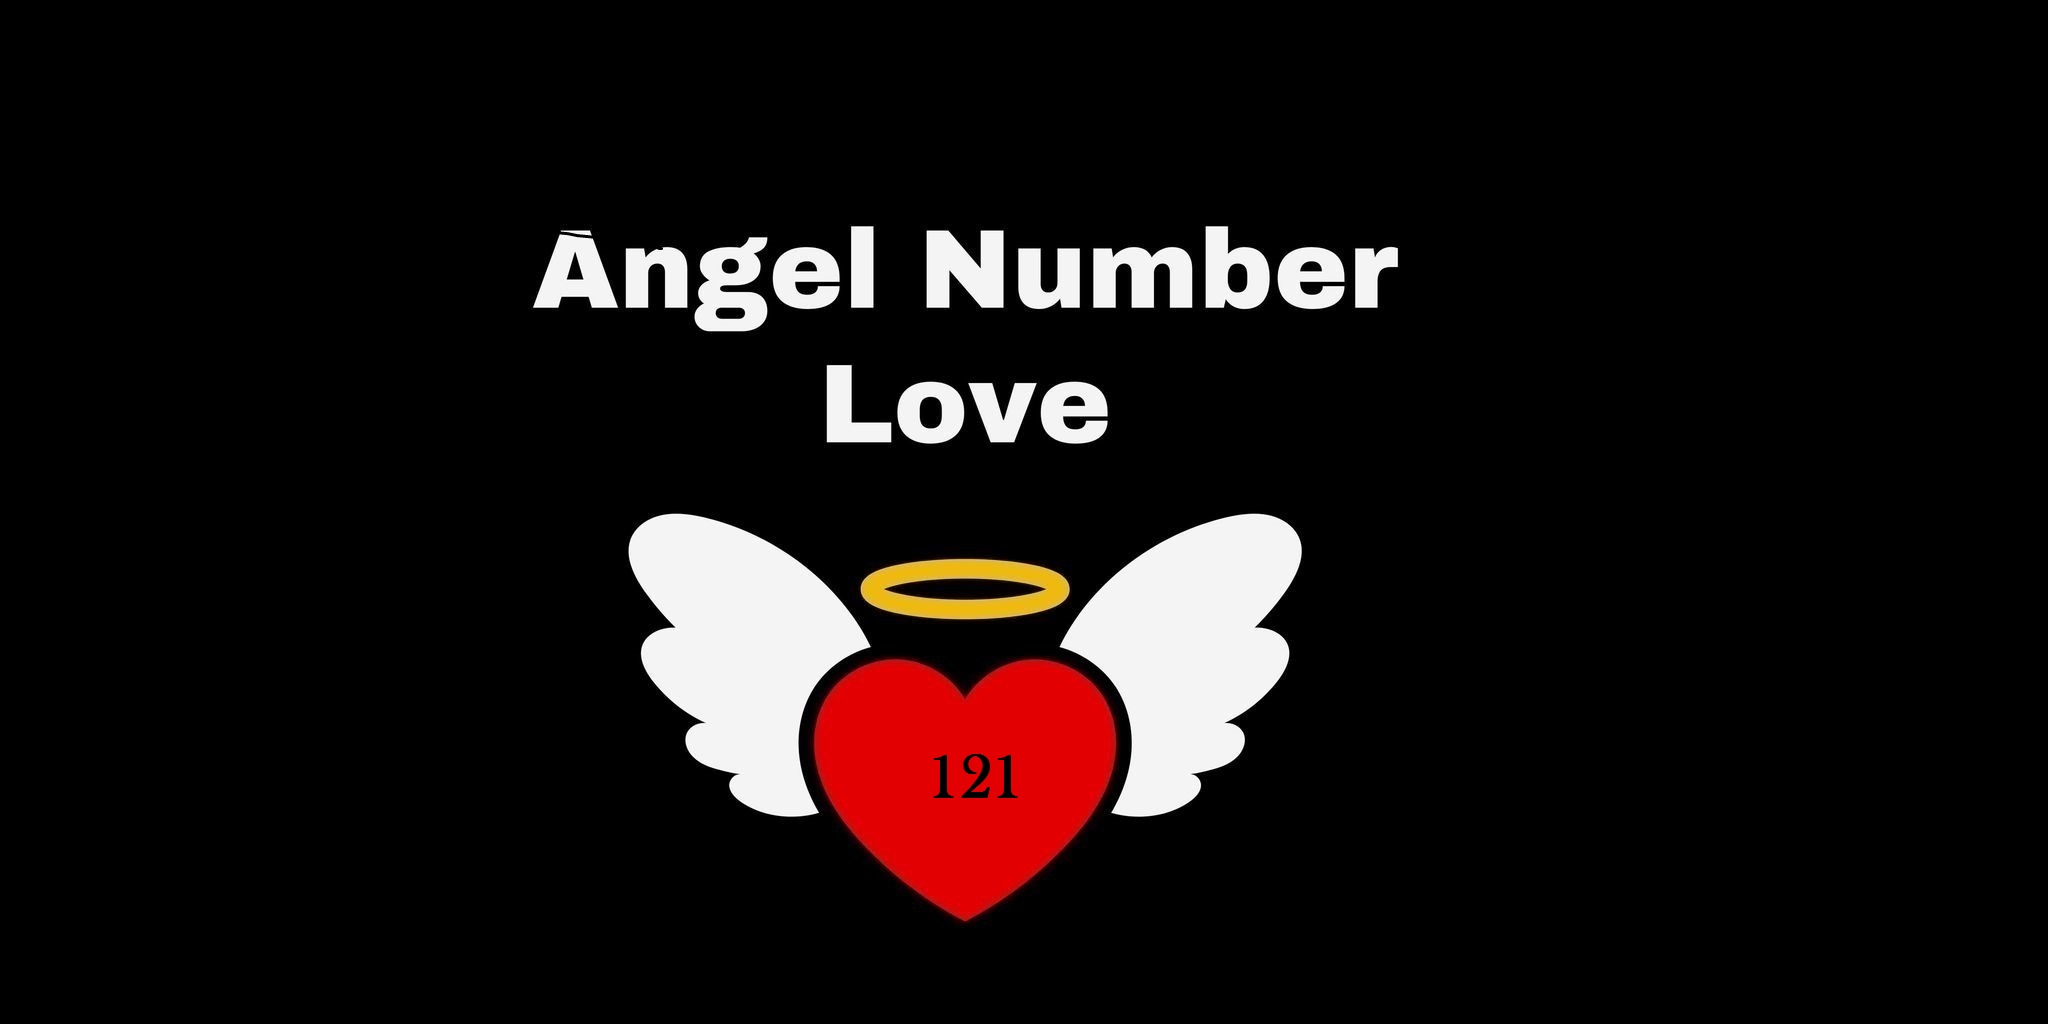 121 Angel Number Meaning In Love & Relationship